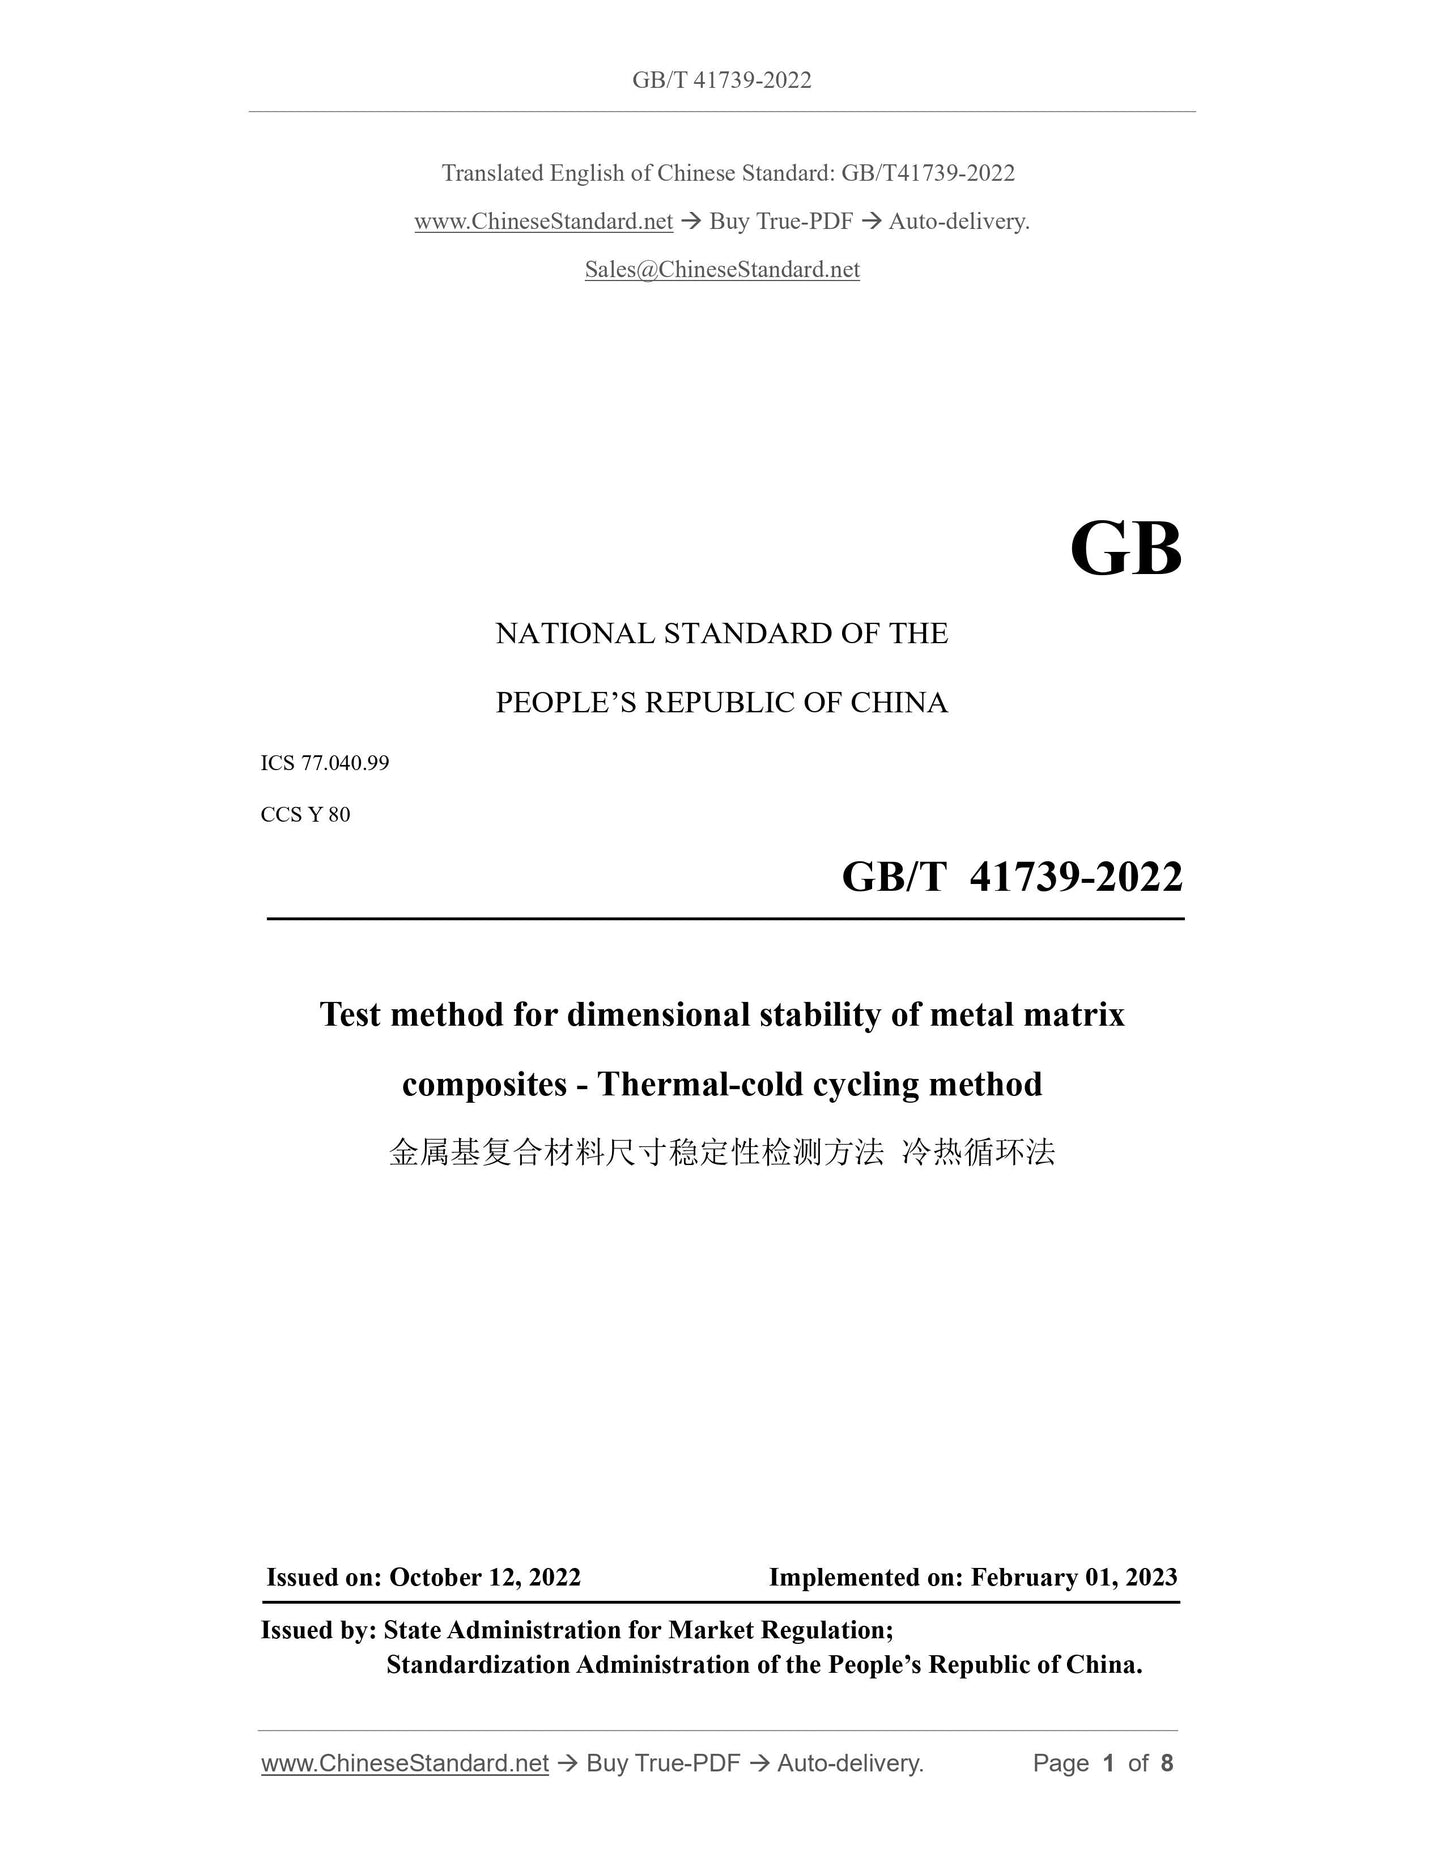 GB/T 41739-2022 Page 1